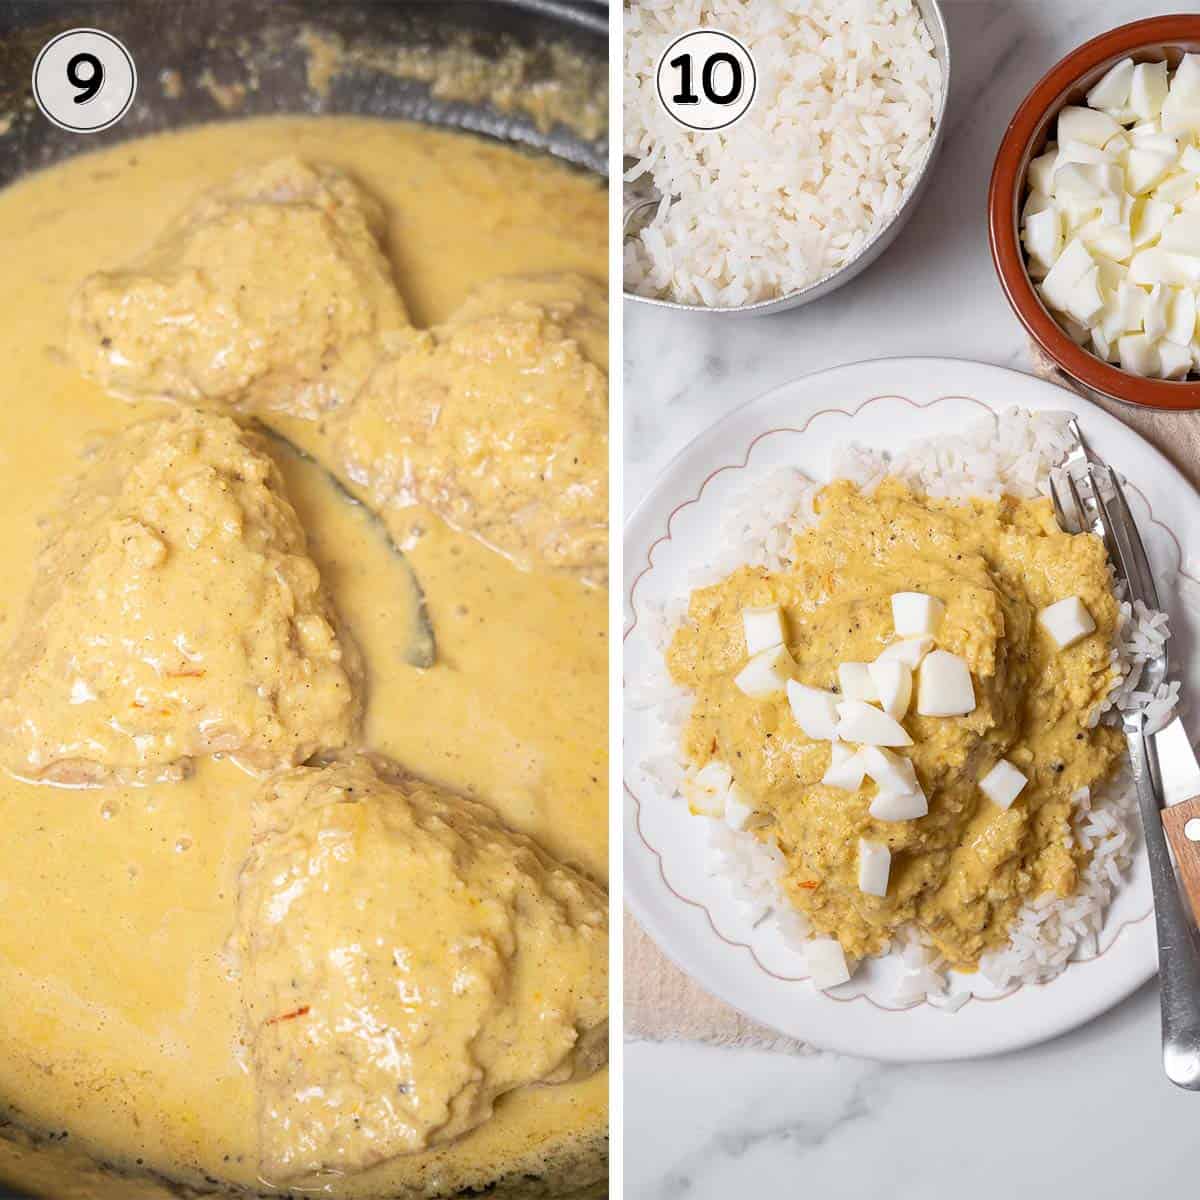 cooking the chicken in almond sauce and serving.